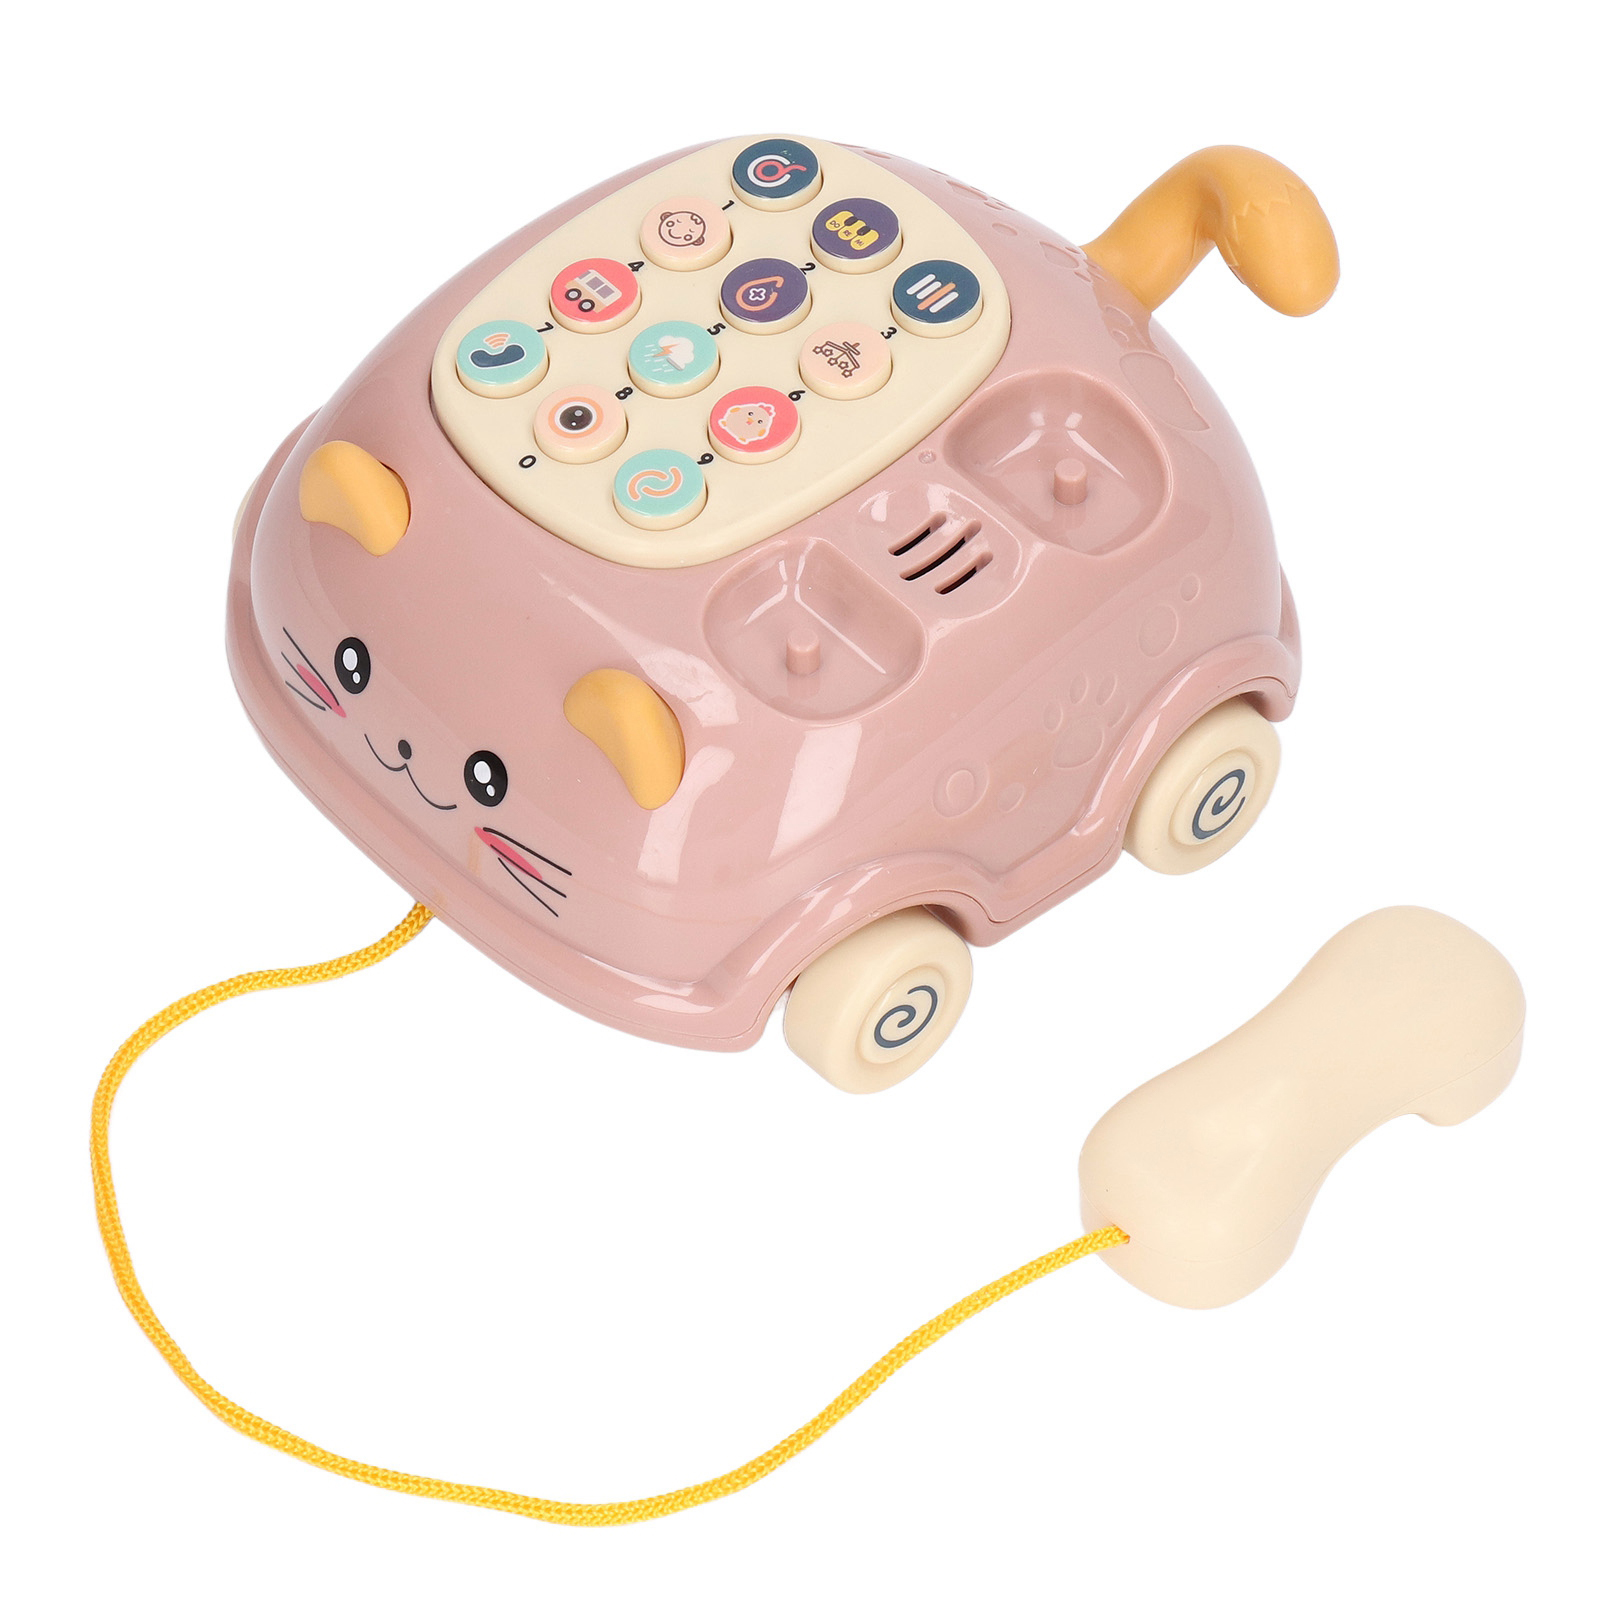 Baby Phone, Plastic Bilingual 12 Buttons Baby Musical Toy  For Enlightment Pink - image 3 of 8